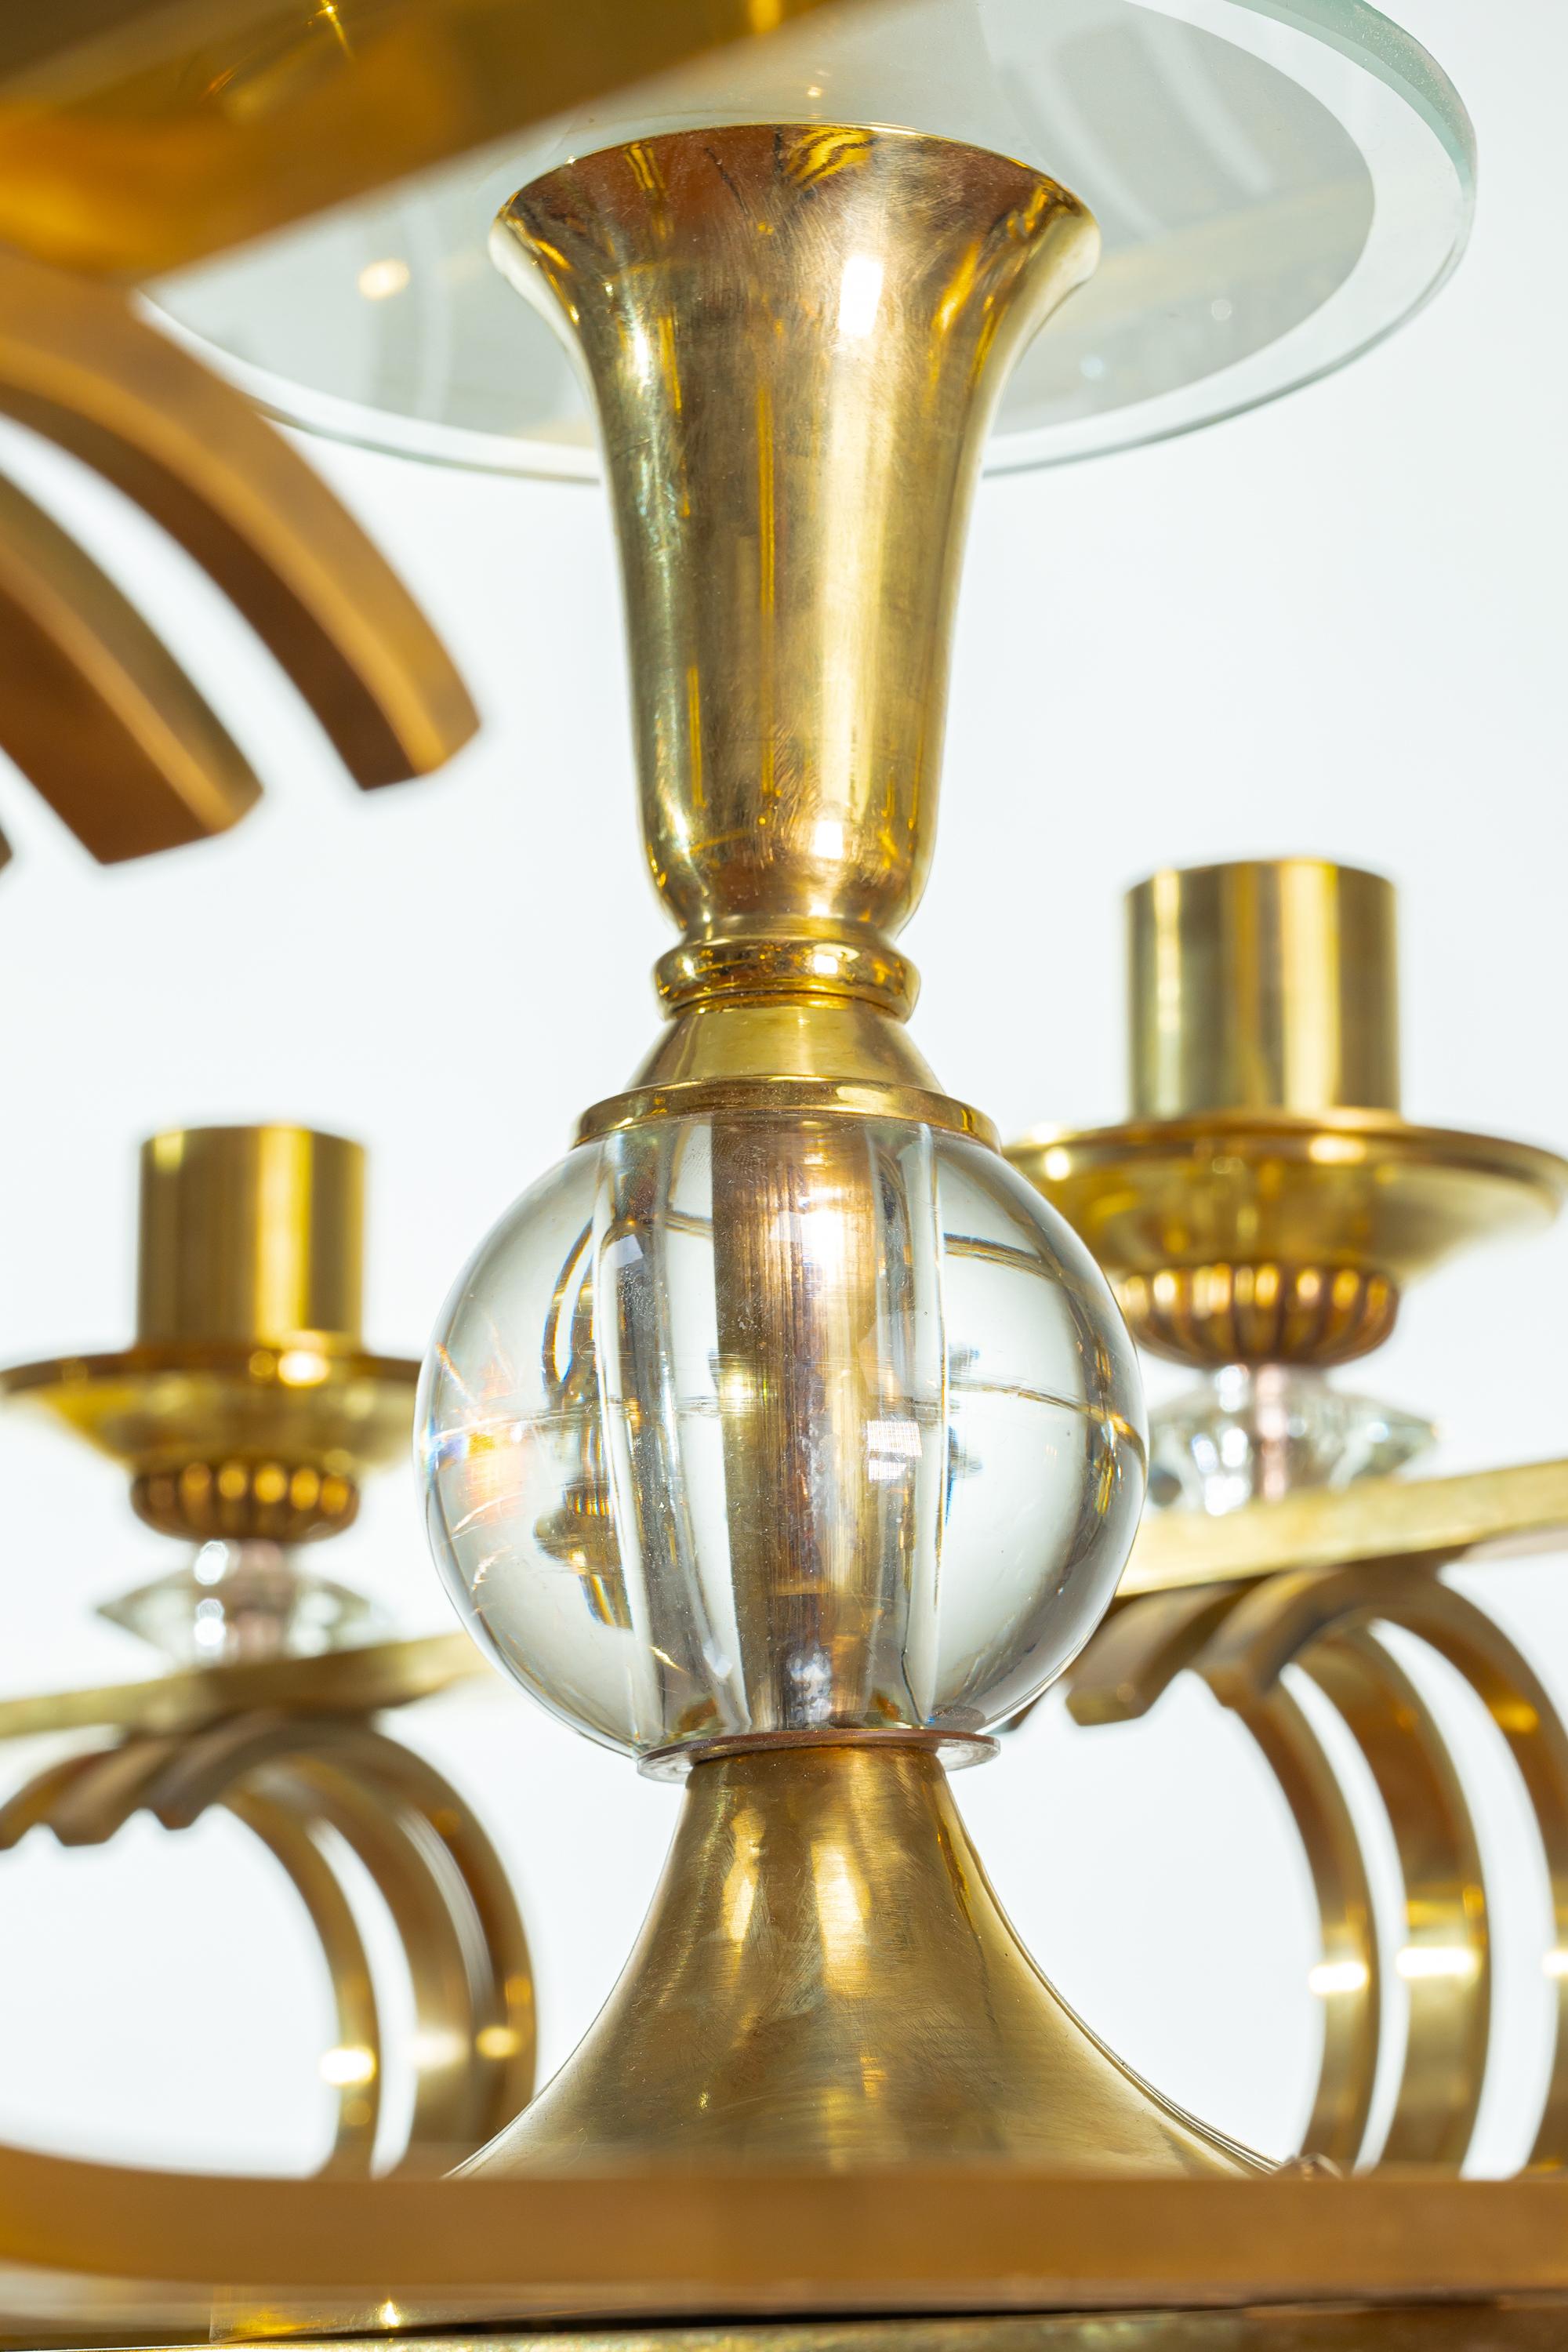 20th Century Scandinavian Brass Chandelier in Paavo Tynell Style, Early 1900s For Sale